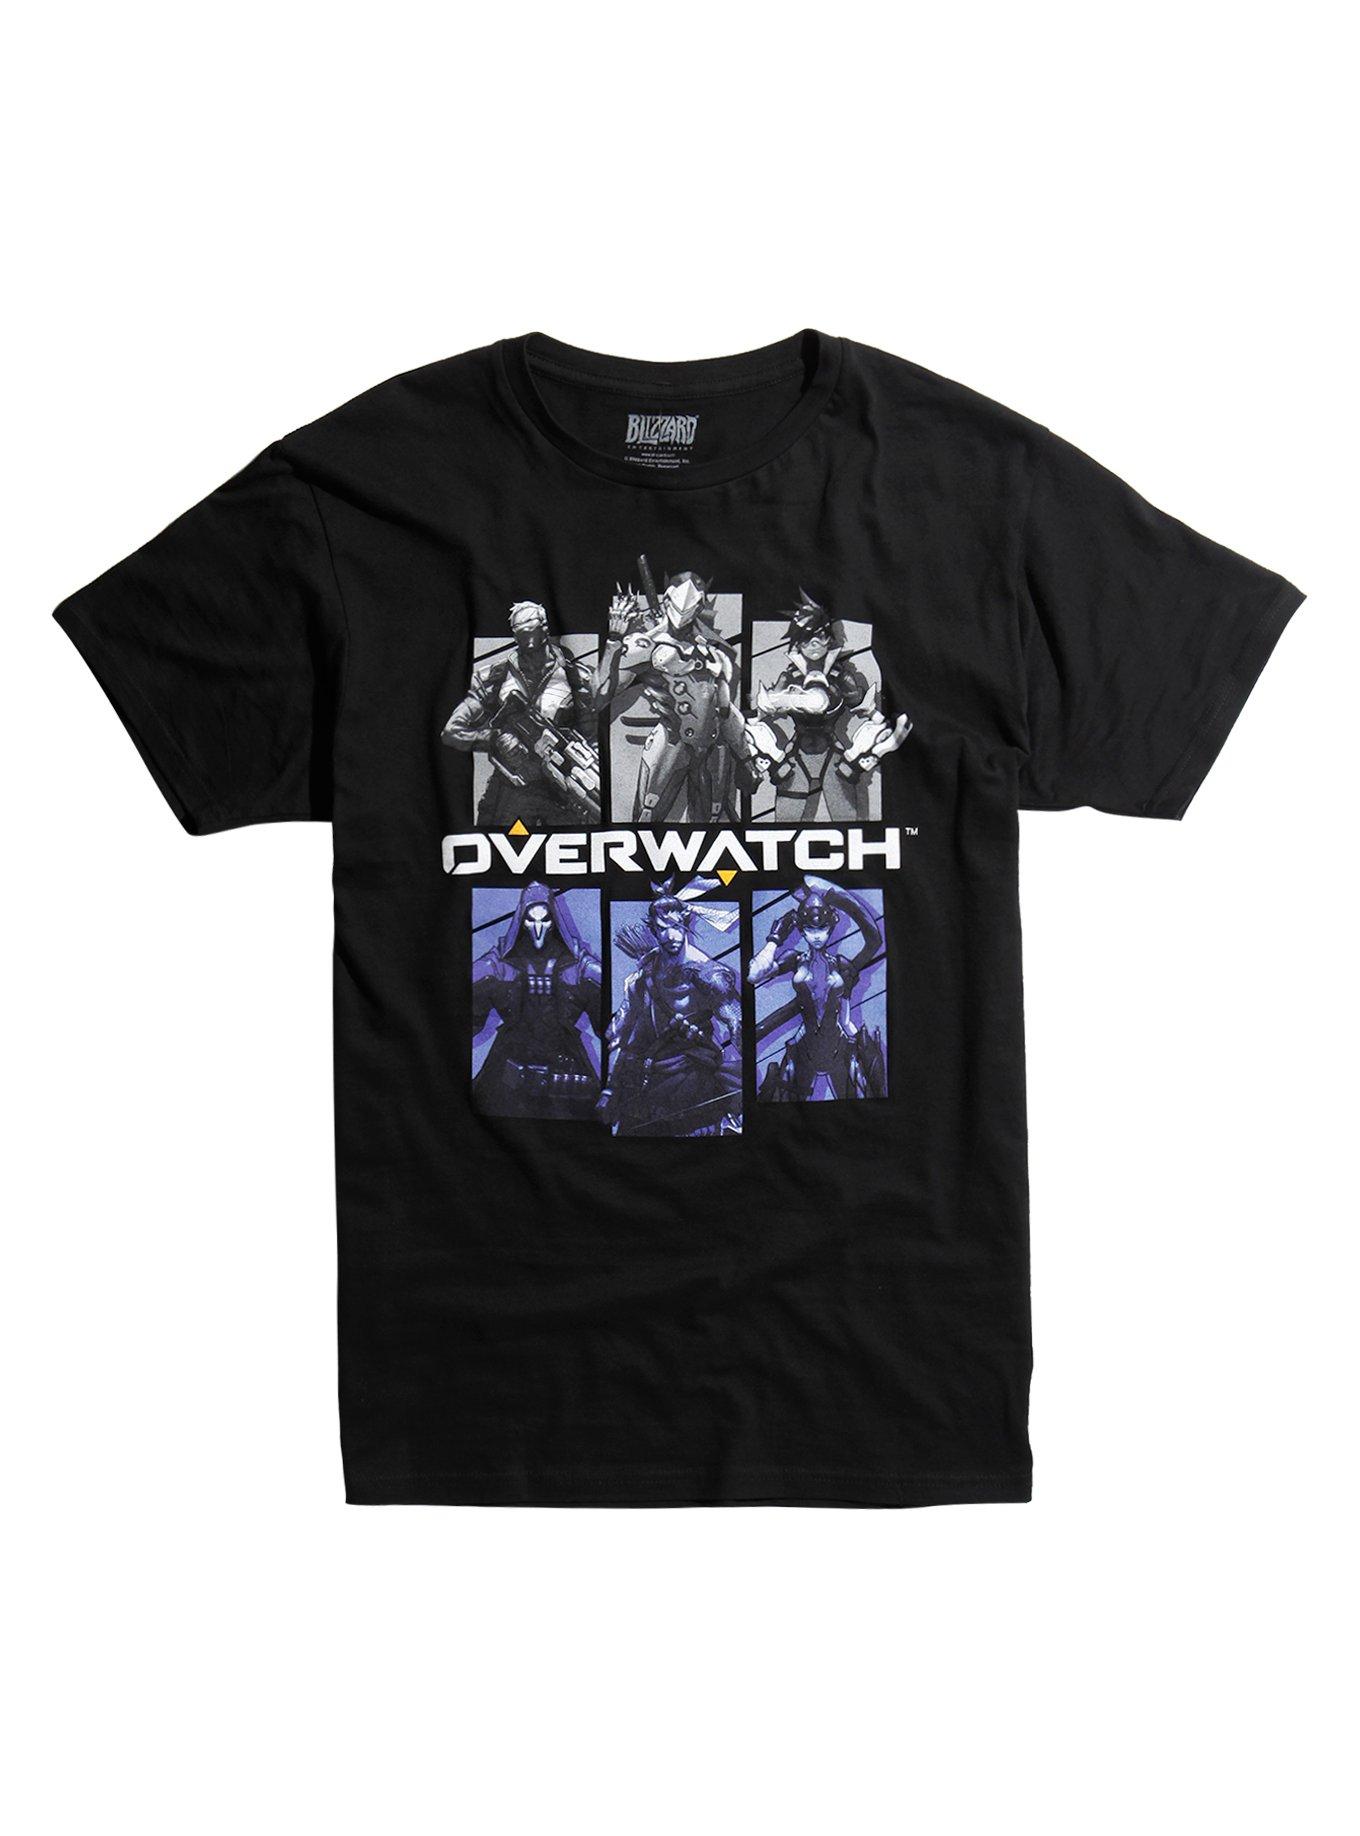 Overwatch Bring Your Friends T-Shirt, BLACK, hi-res